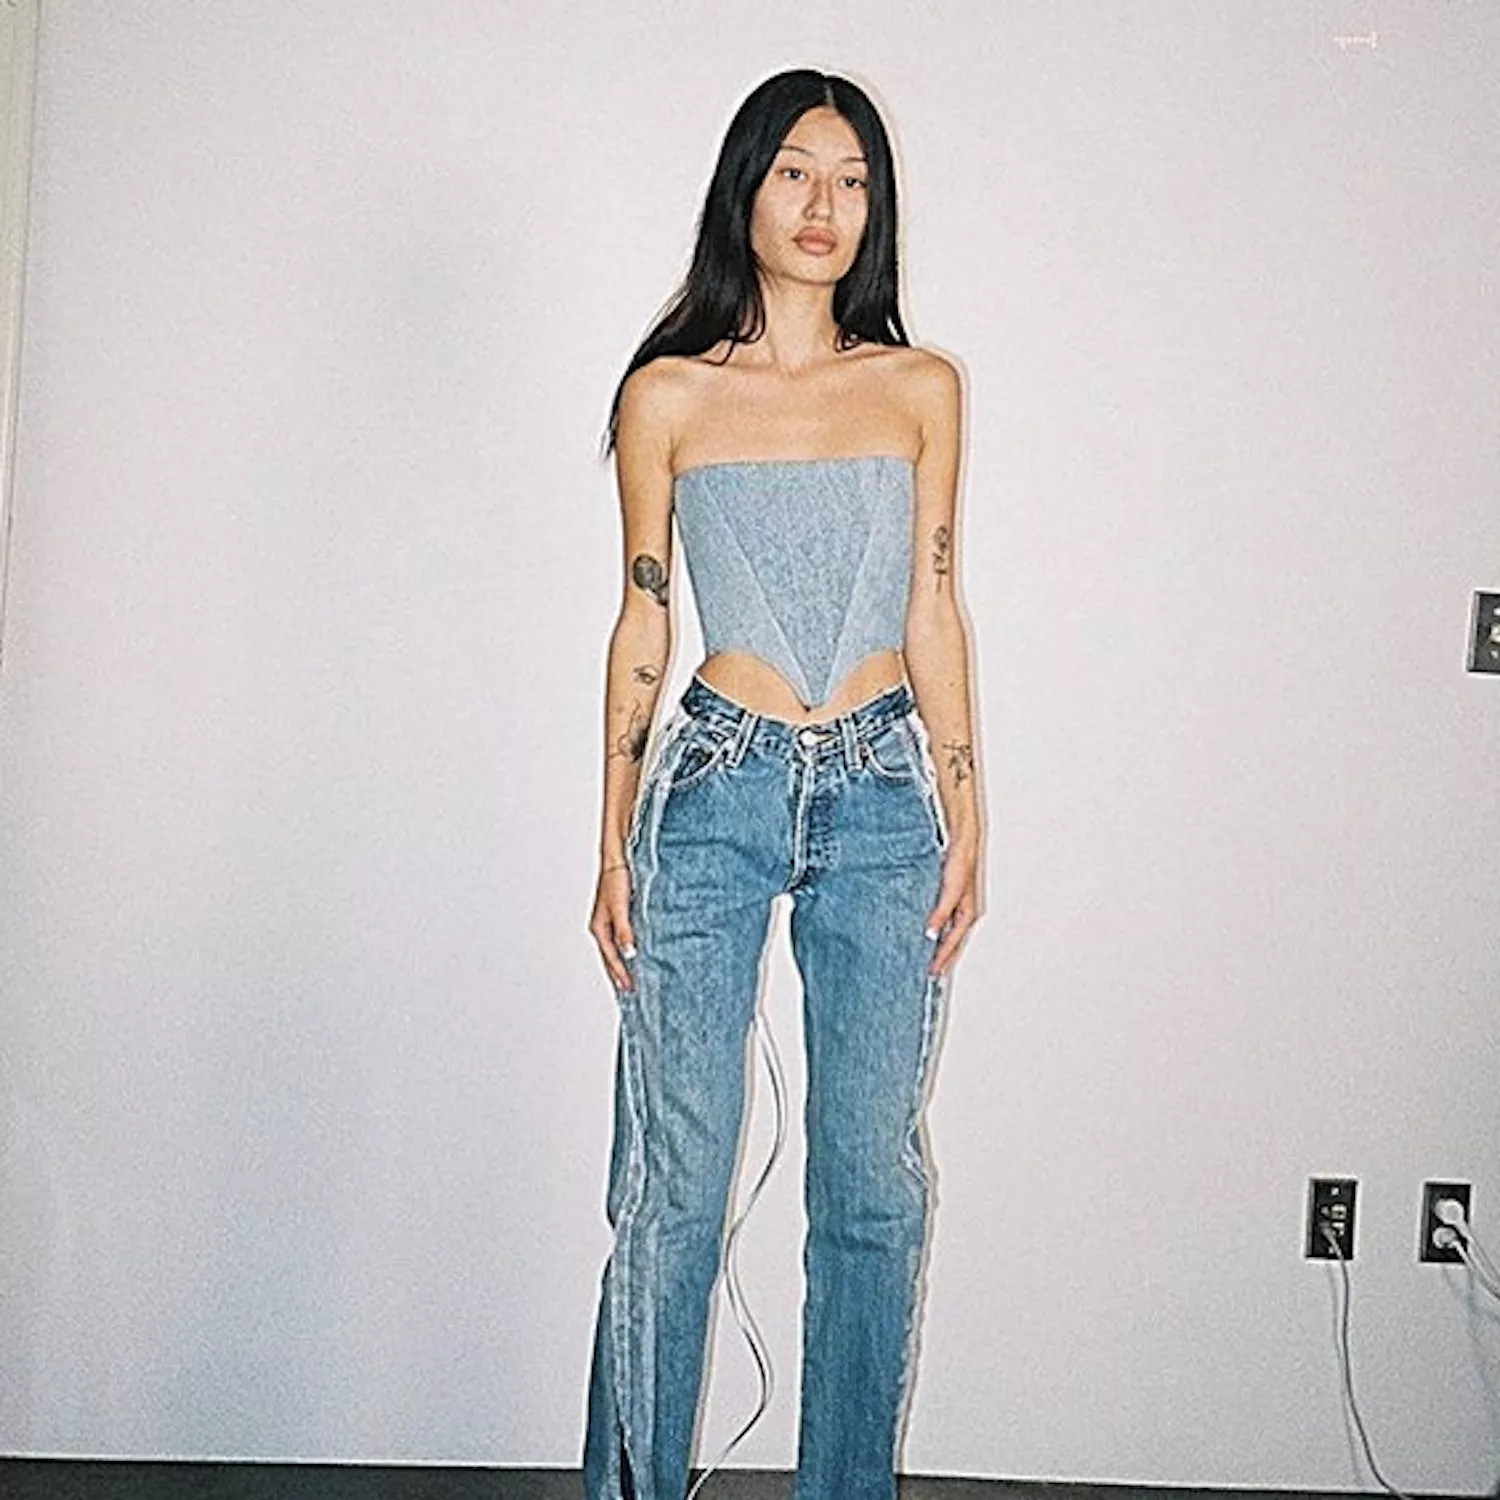 woman in denim corset and jeans